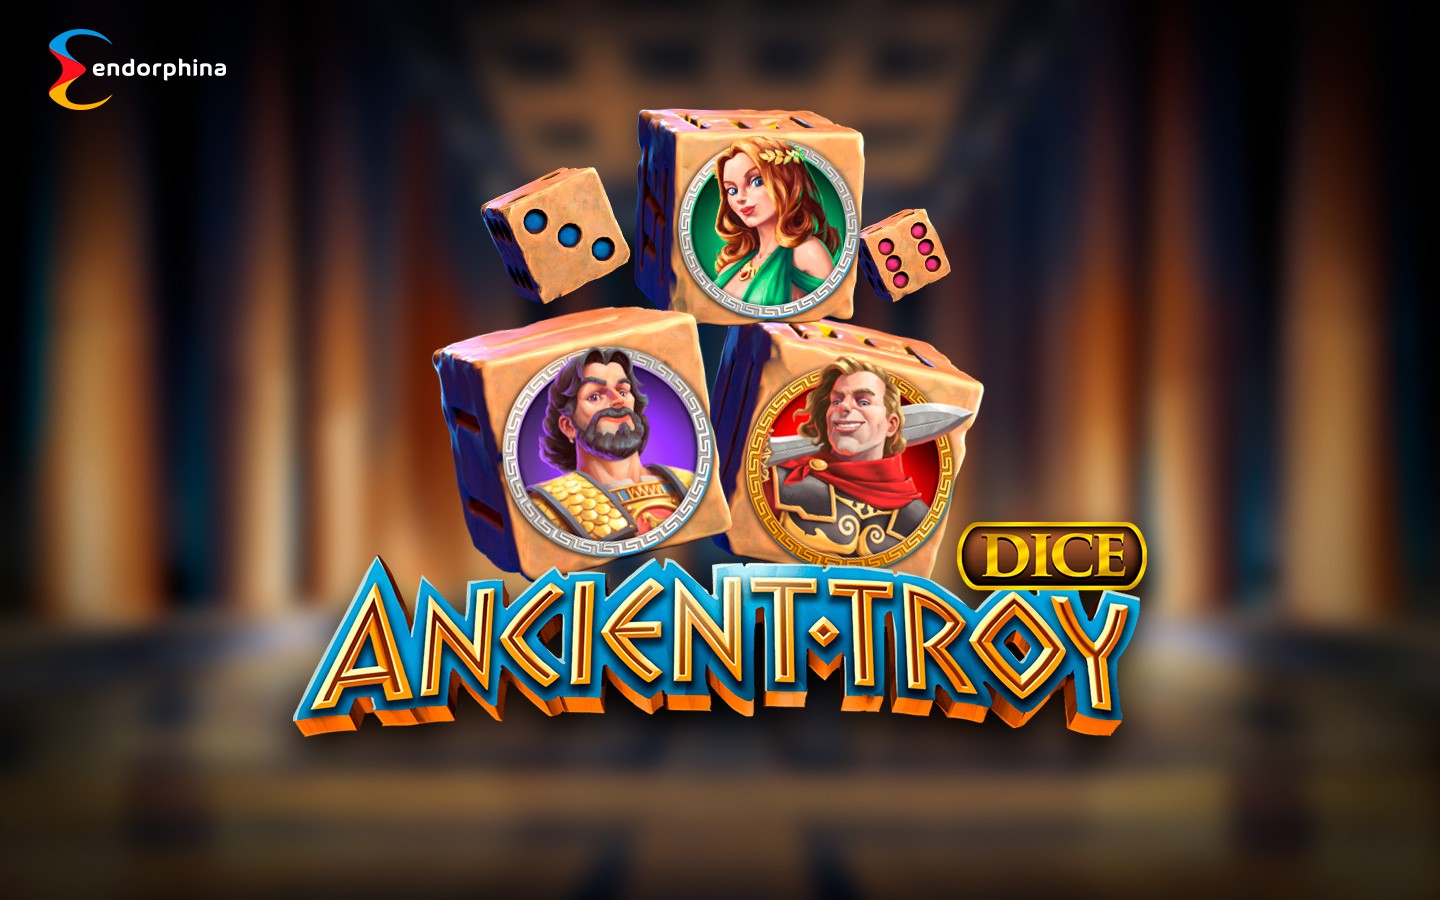 BEST DICE SLOTS ONLINE | Try ANCIENT TROY DICE SLOT now